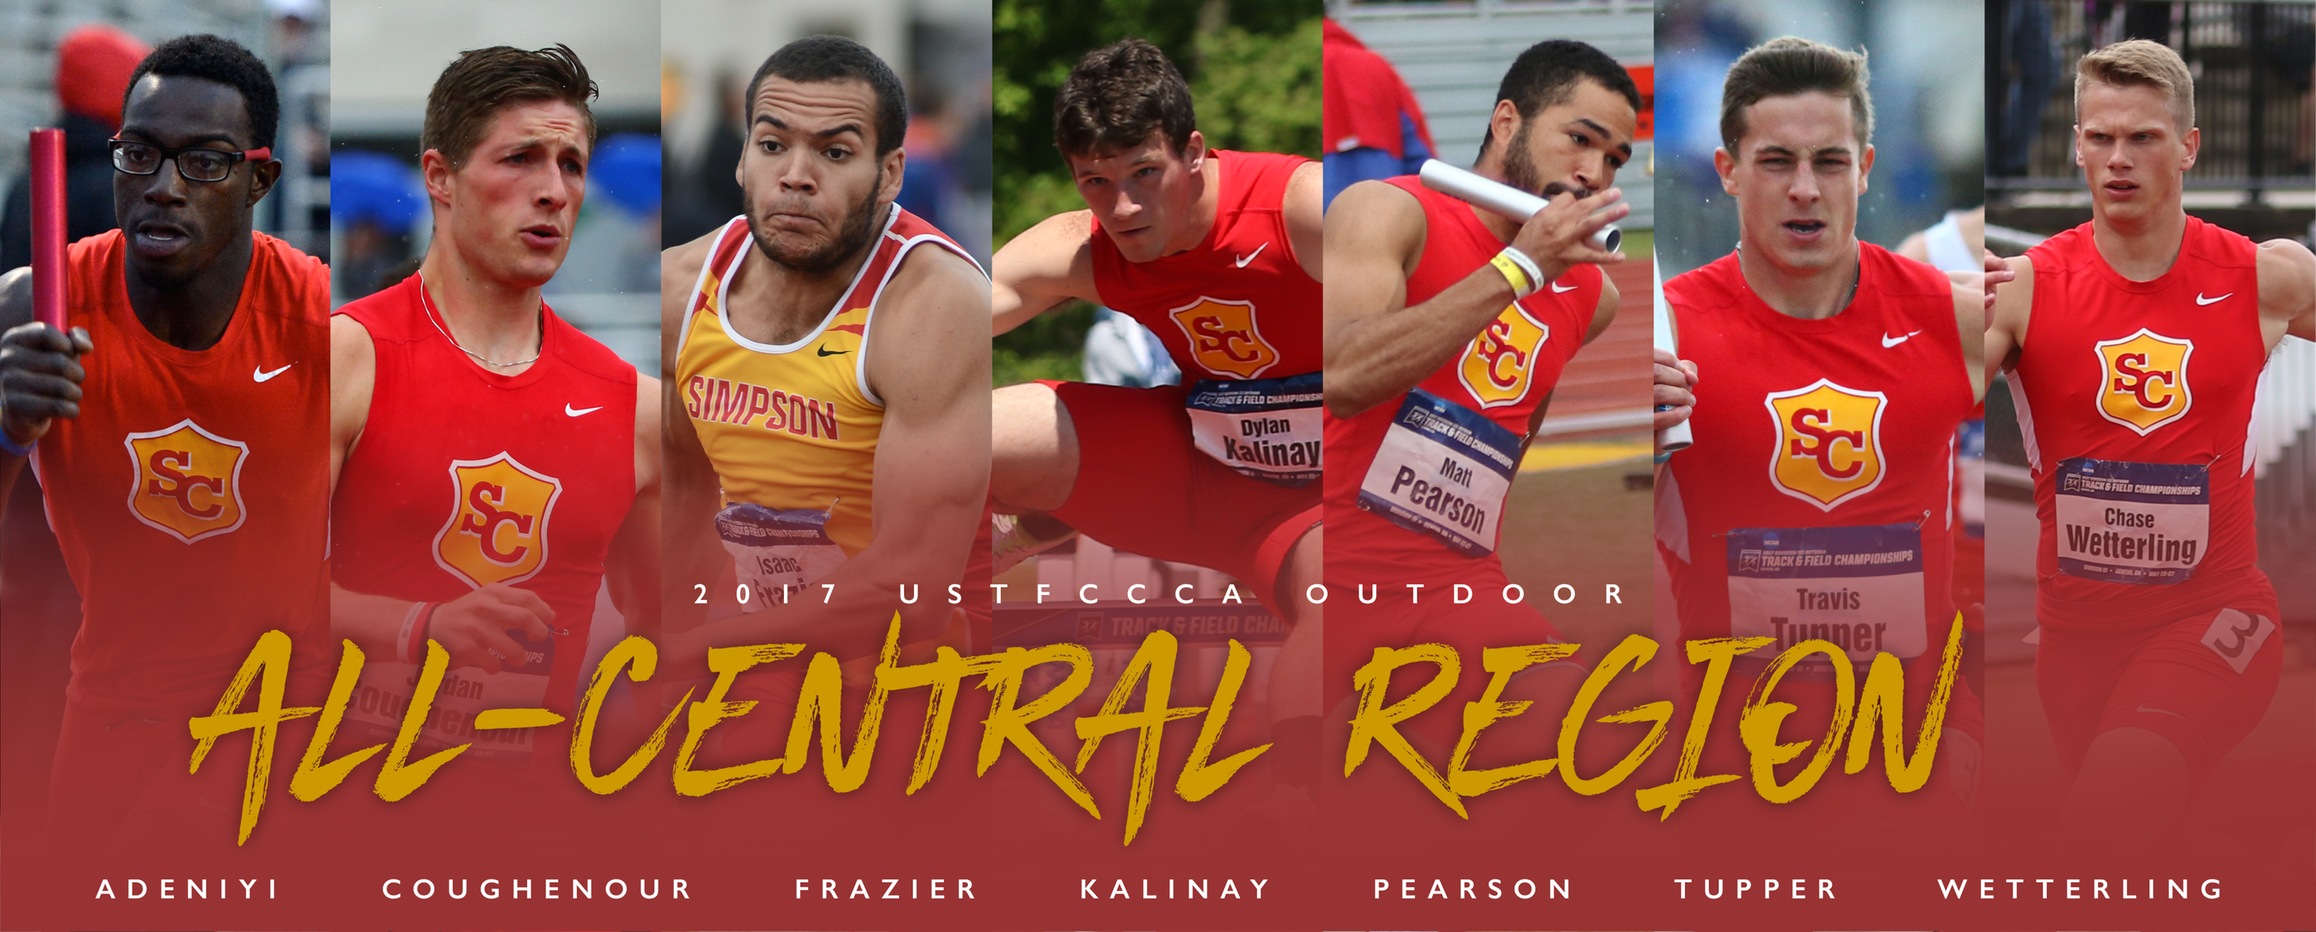 Seven track and field athletes named all-region